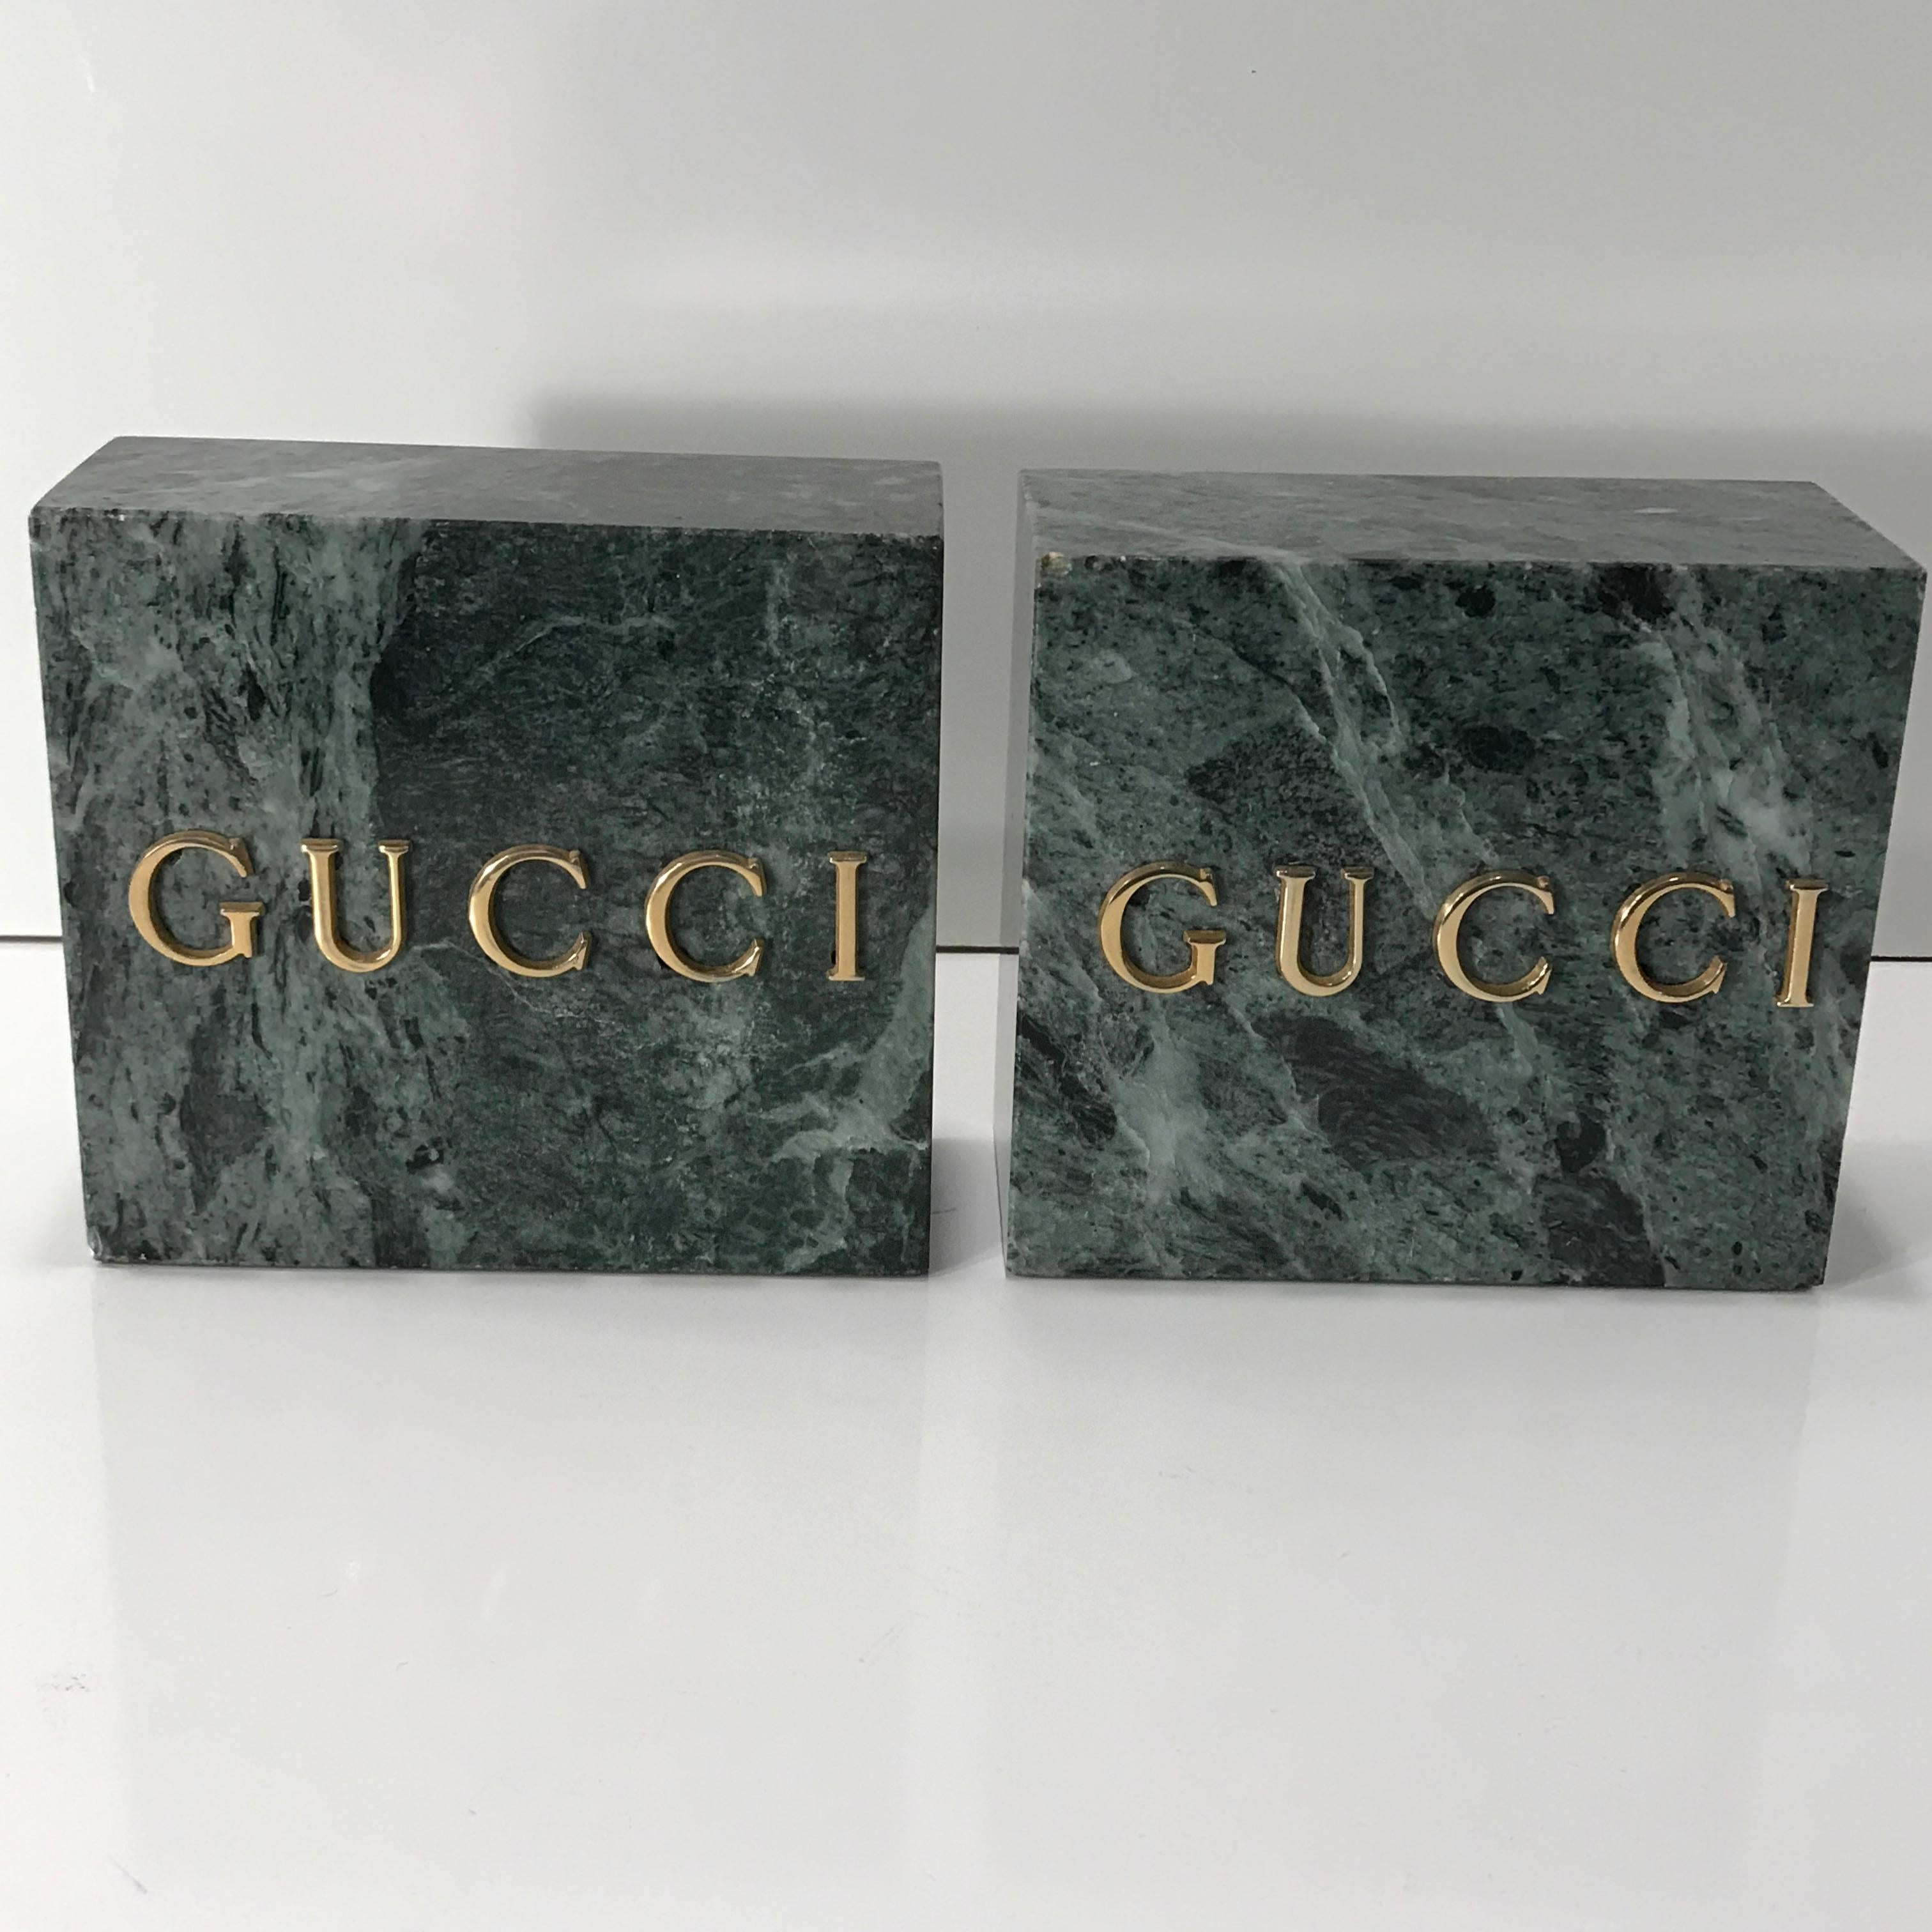 Pair of Gucci Verdigris marble bookends, each one of carved monolith form with inset gilt bronze letters.